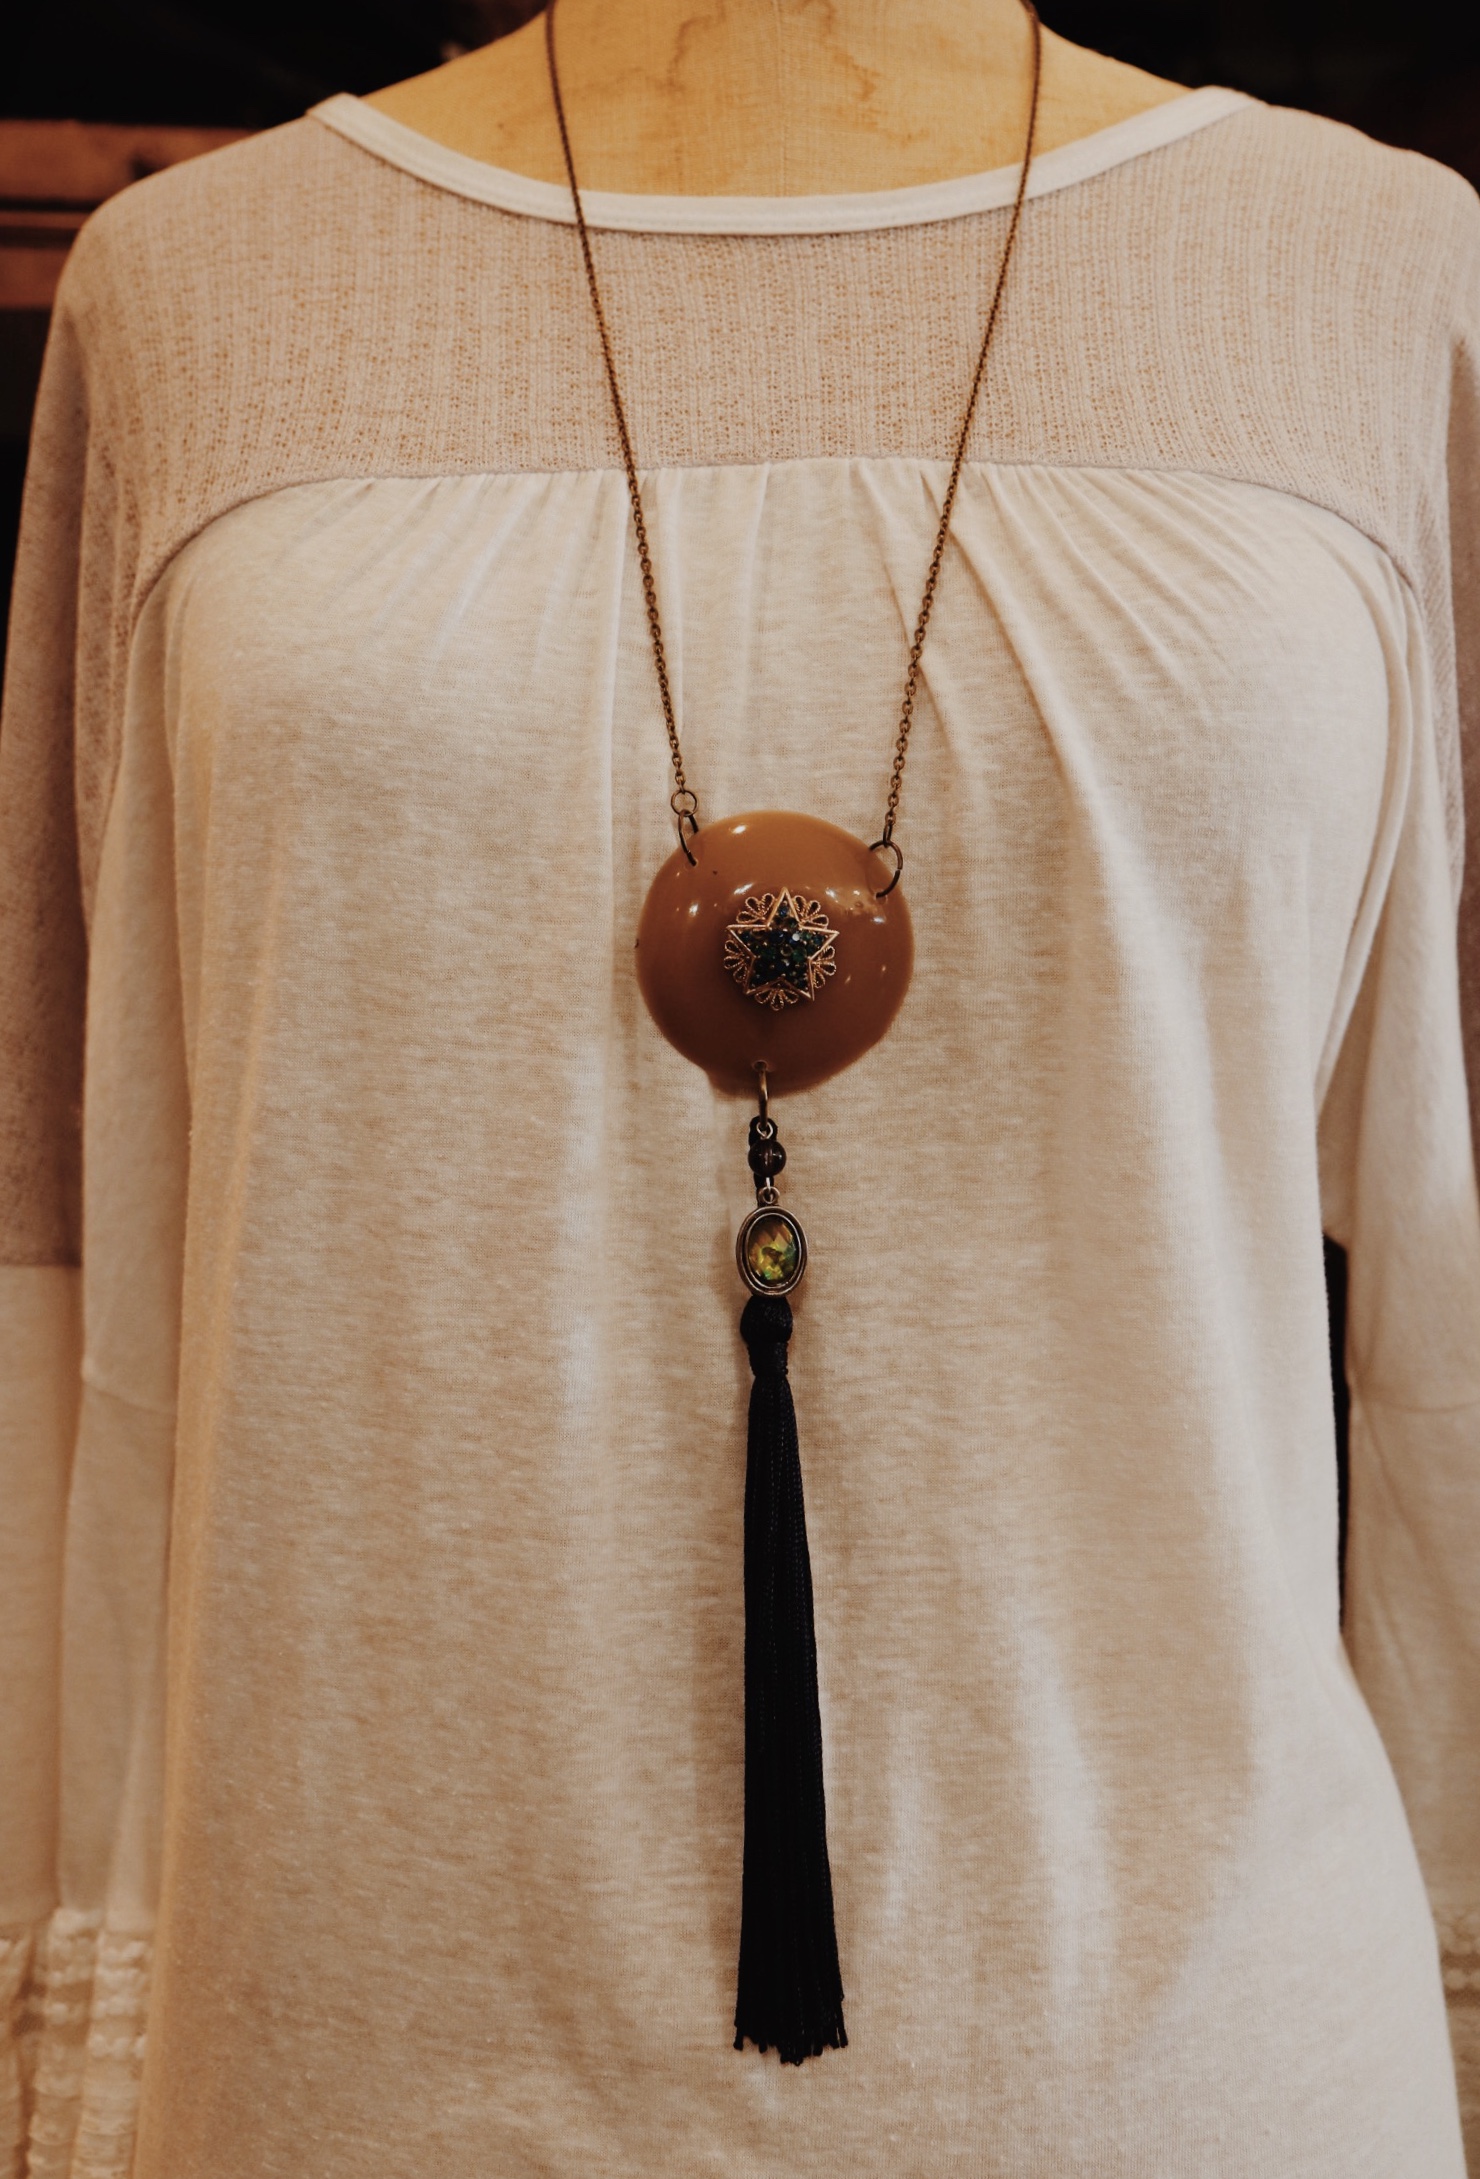 This beautiful, handmade necklace is on a 32 inch chain!